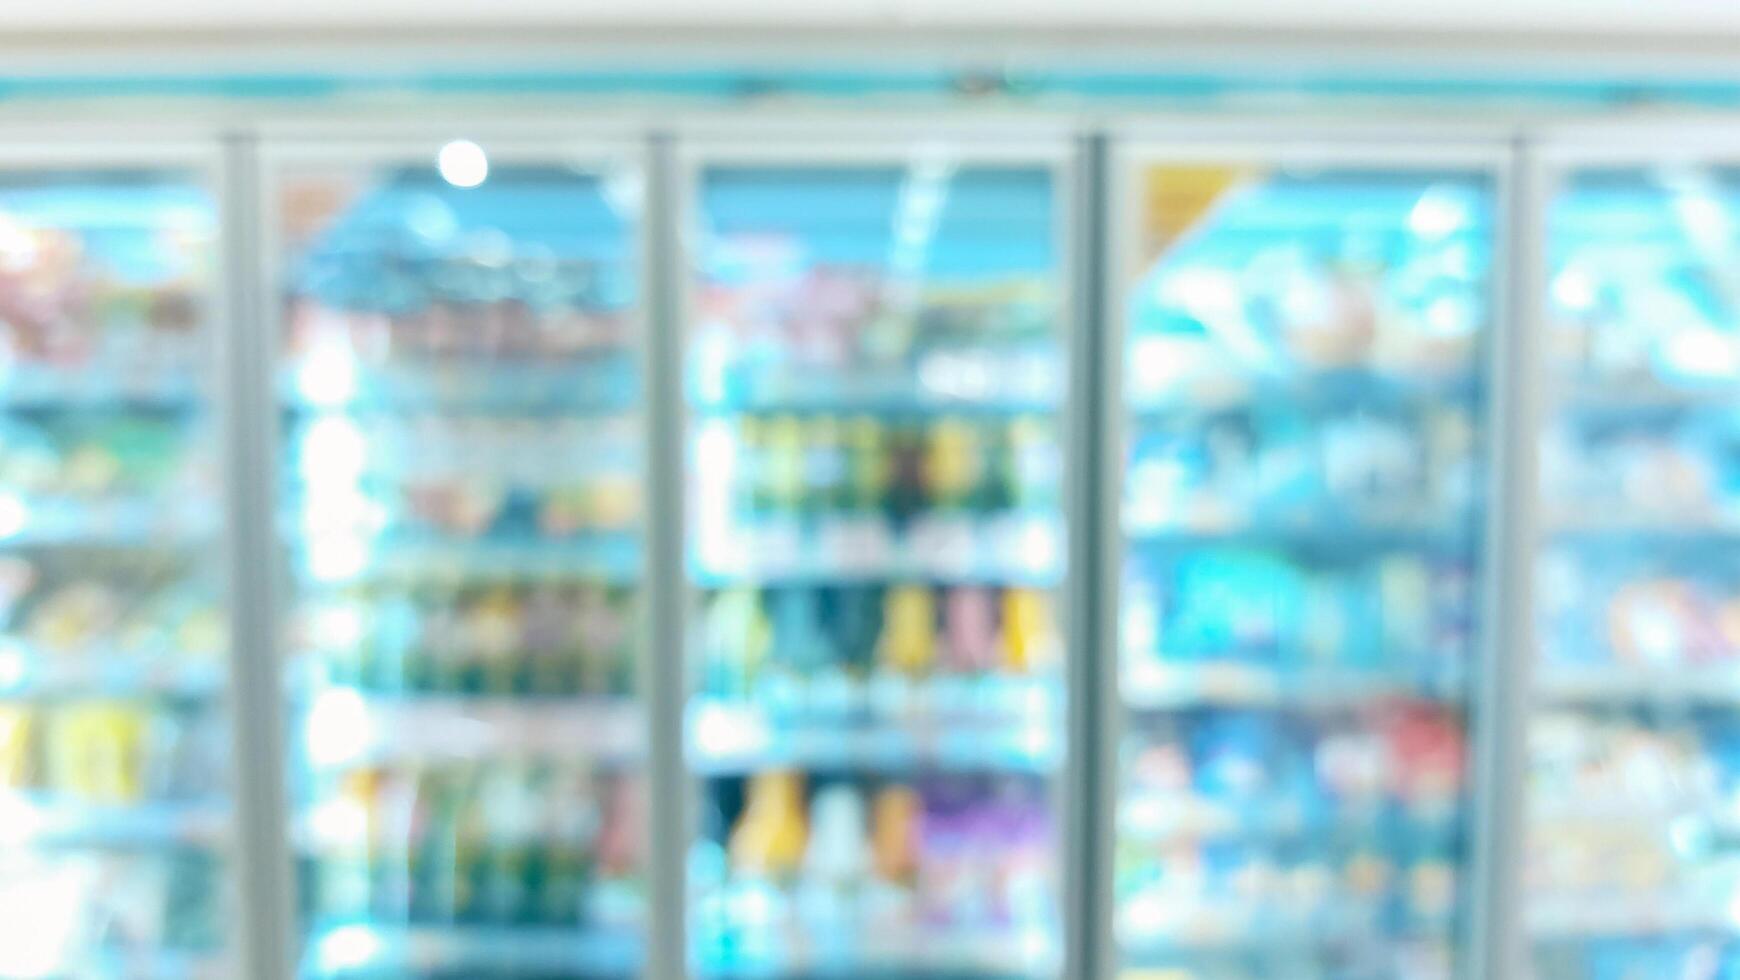 supermarket aisle and shelves blurred background. grocery store retail business concept photo